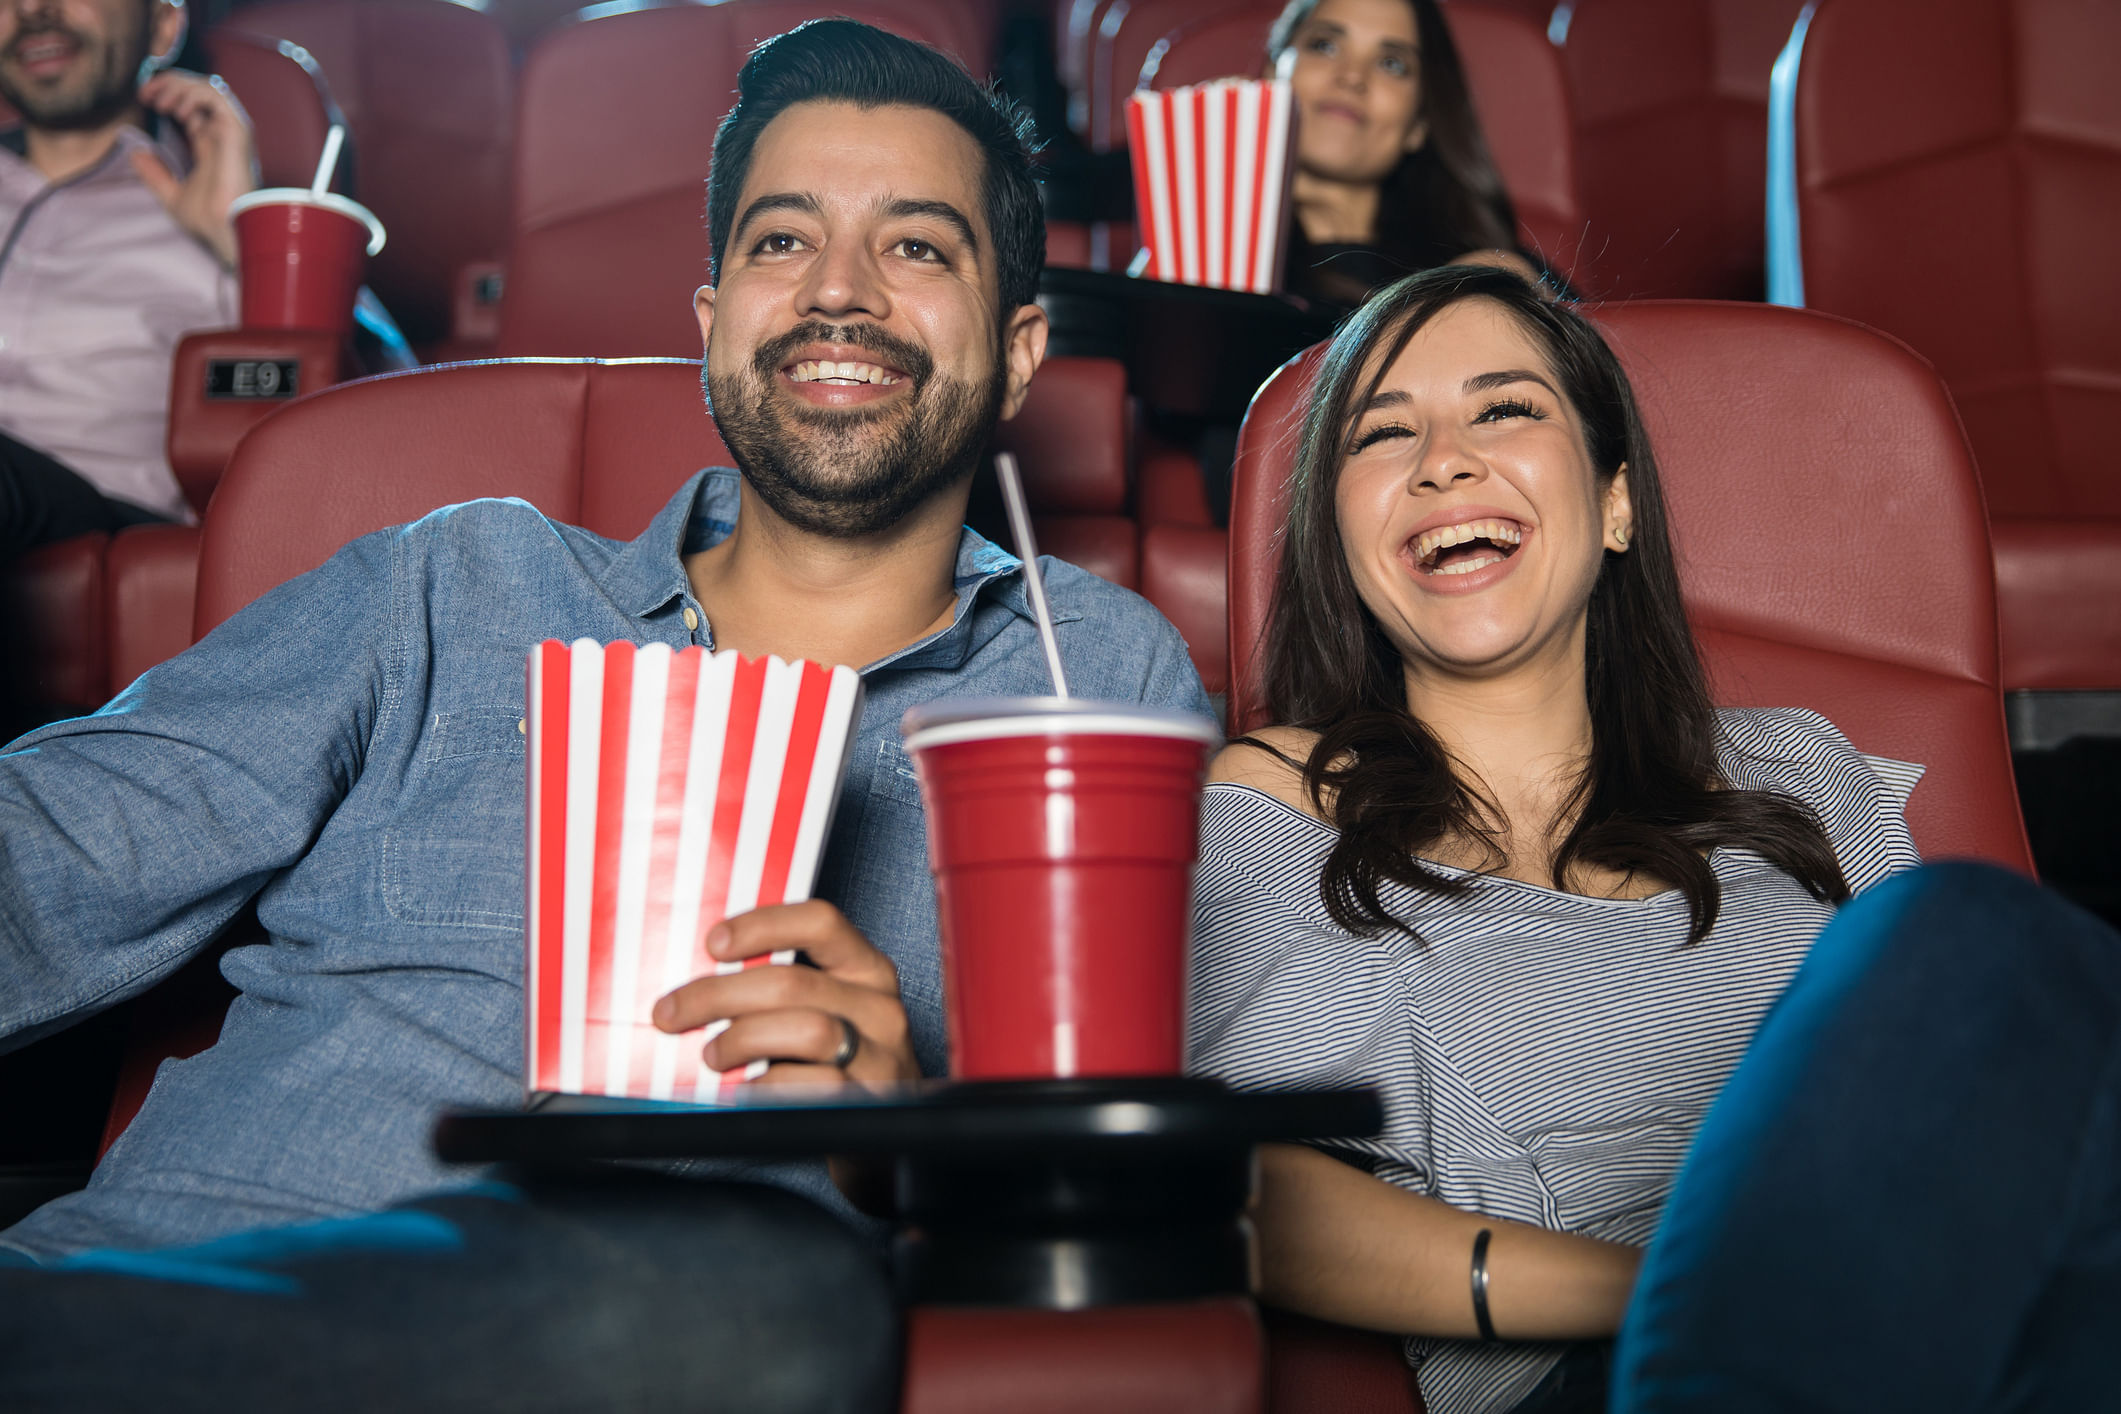 Can a multiplex stop you from carrying home food inside? That’s one of the questions the Bombay High Court is hearing.